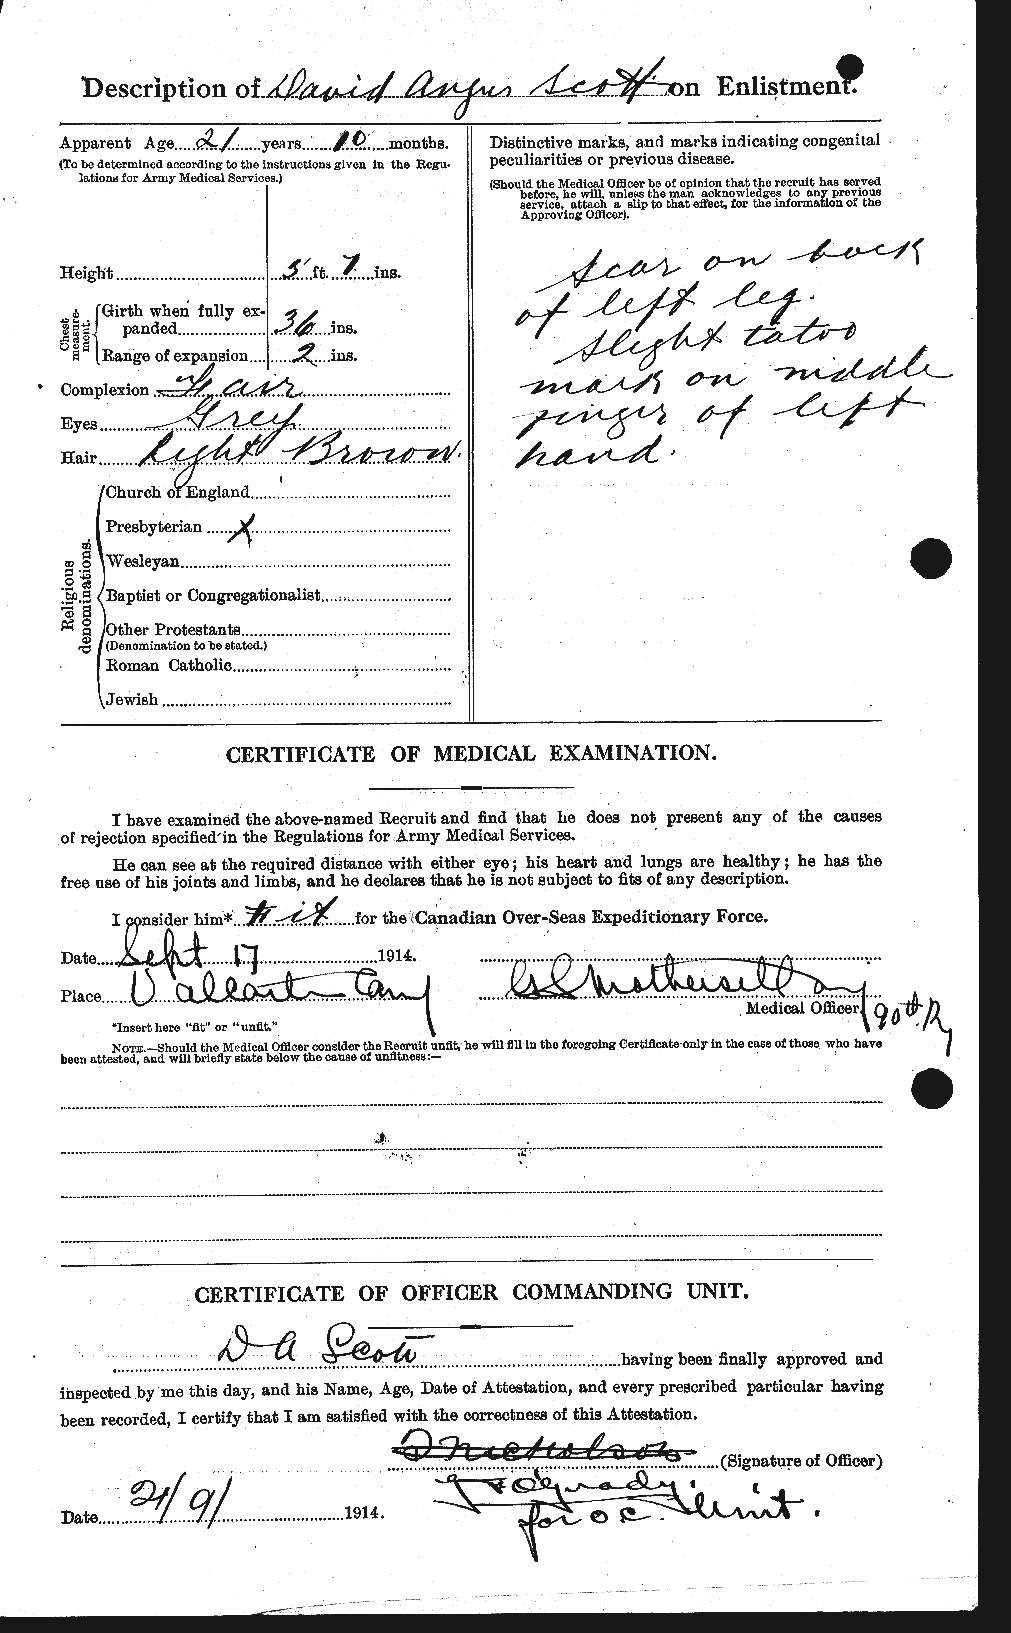 Personnel Records of the First World War - CEF 085601b